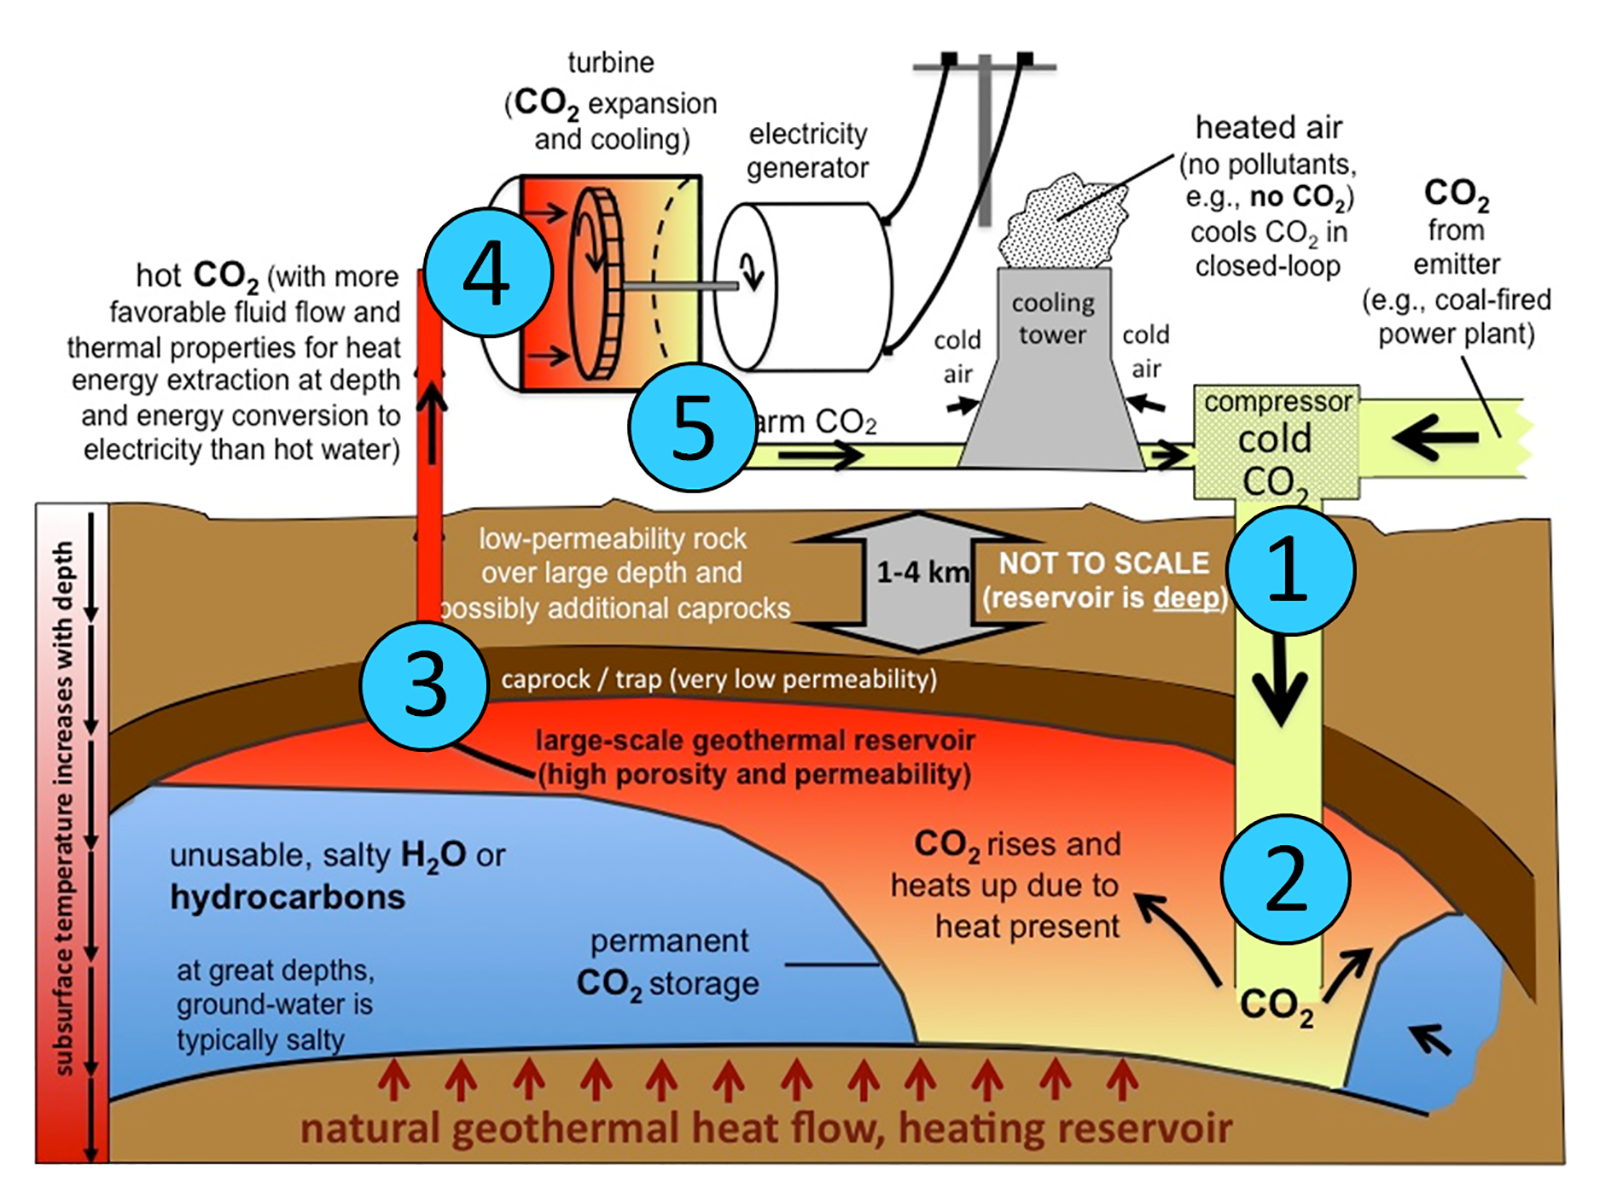 Enlarged view: Illustration Geothermal Energy and Geofluids